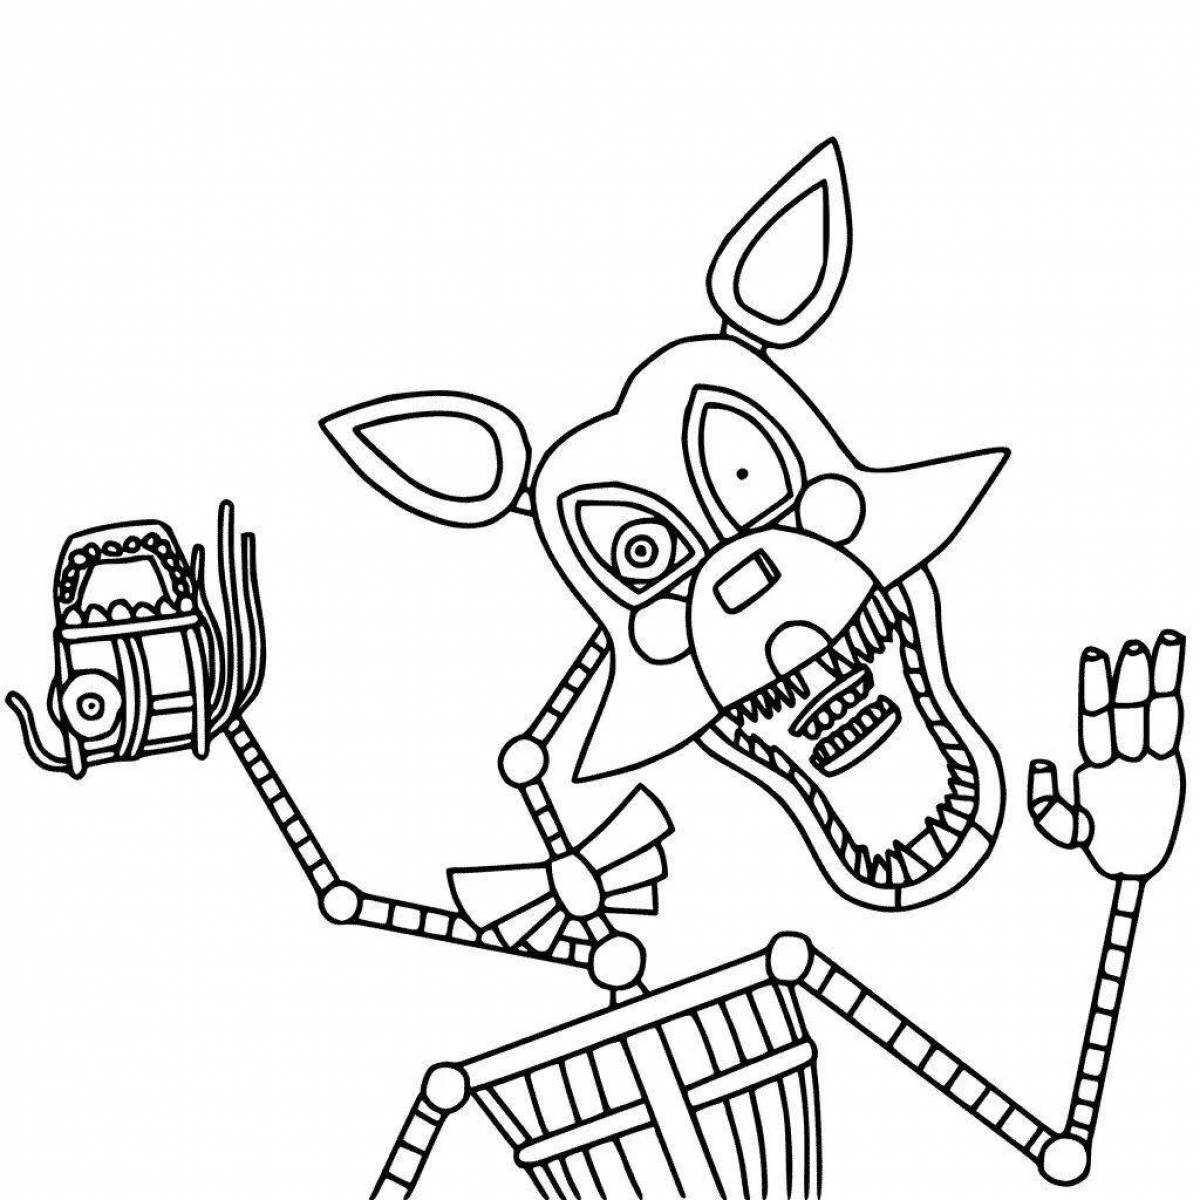 Animated foxy fox coloring book